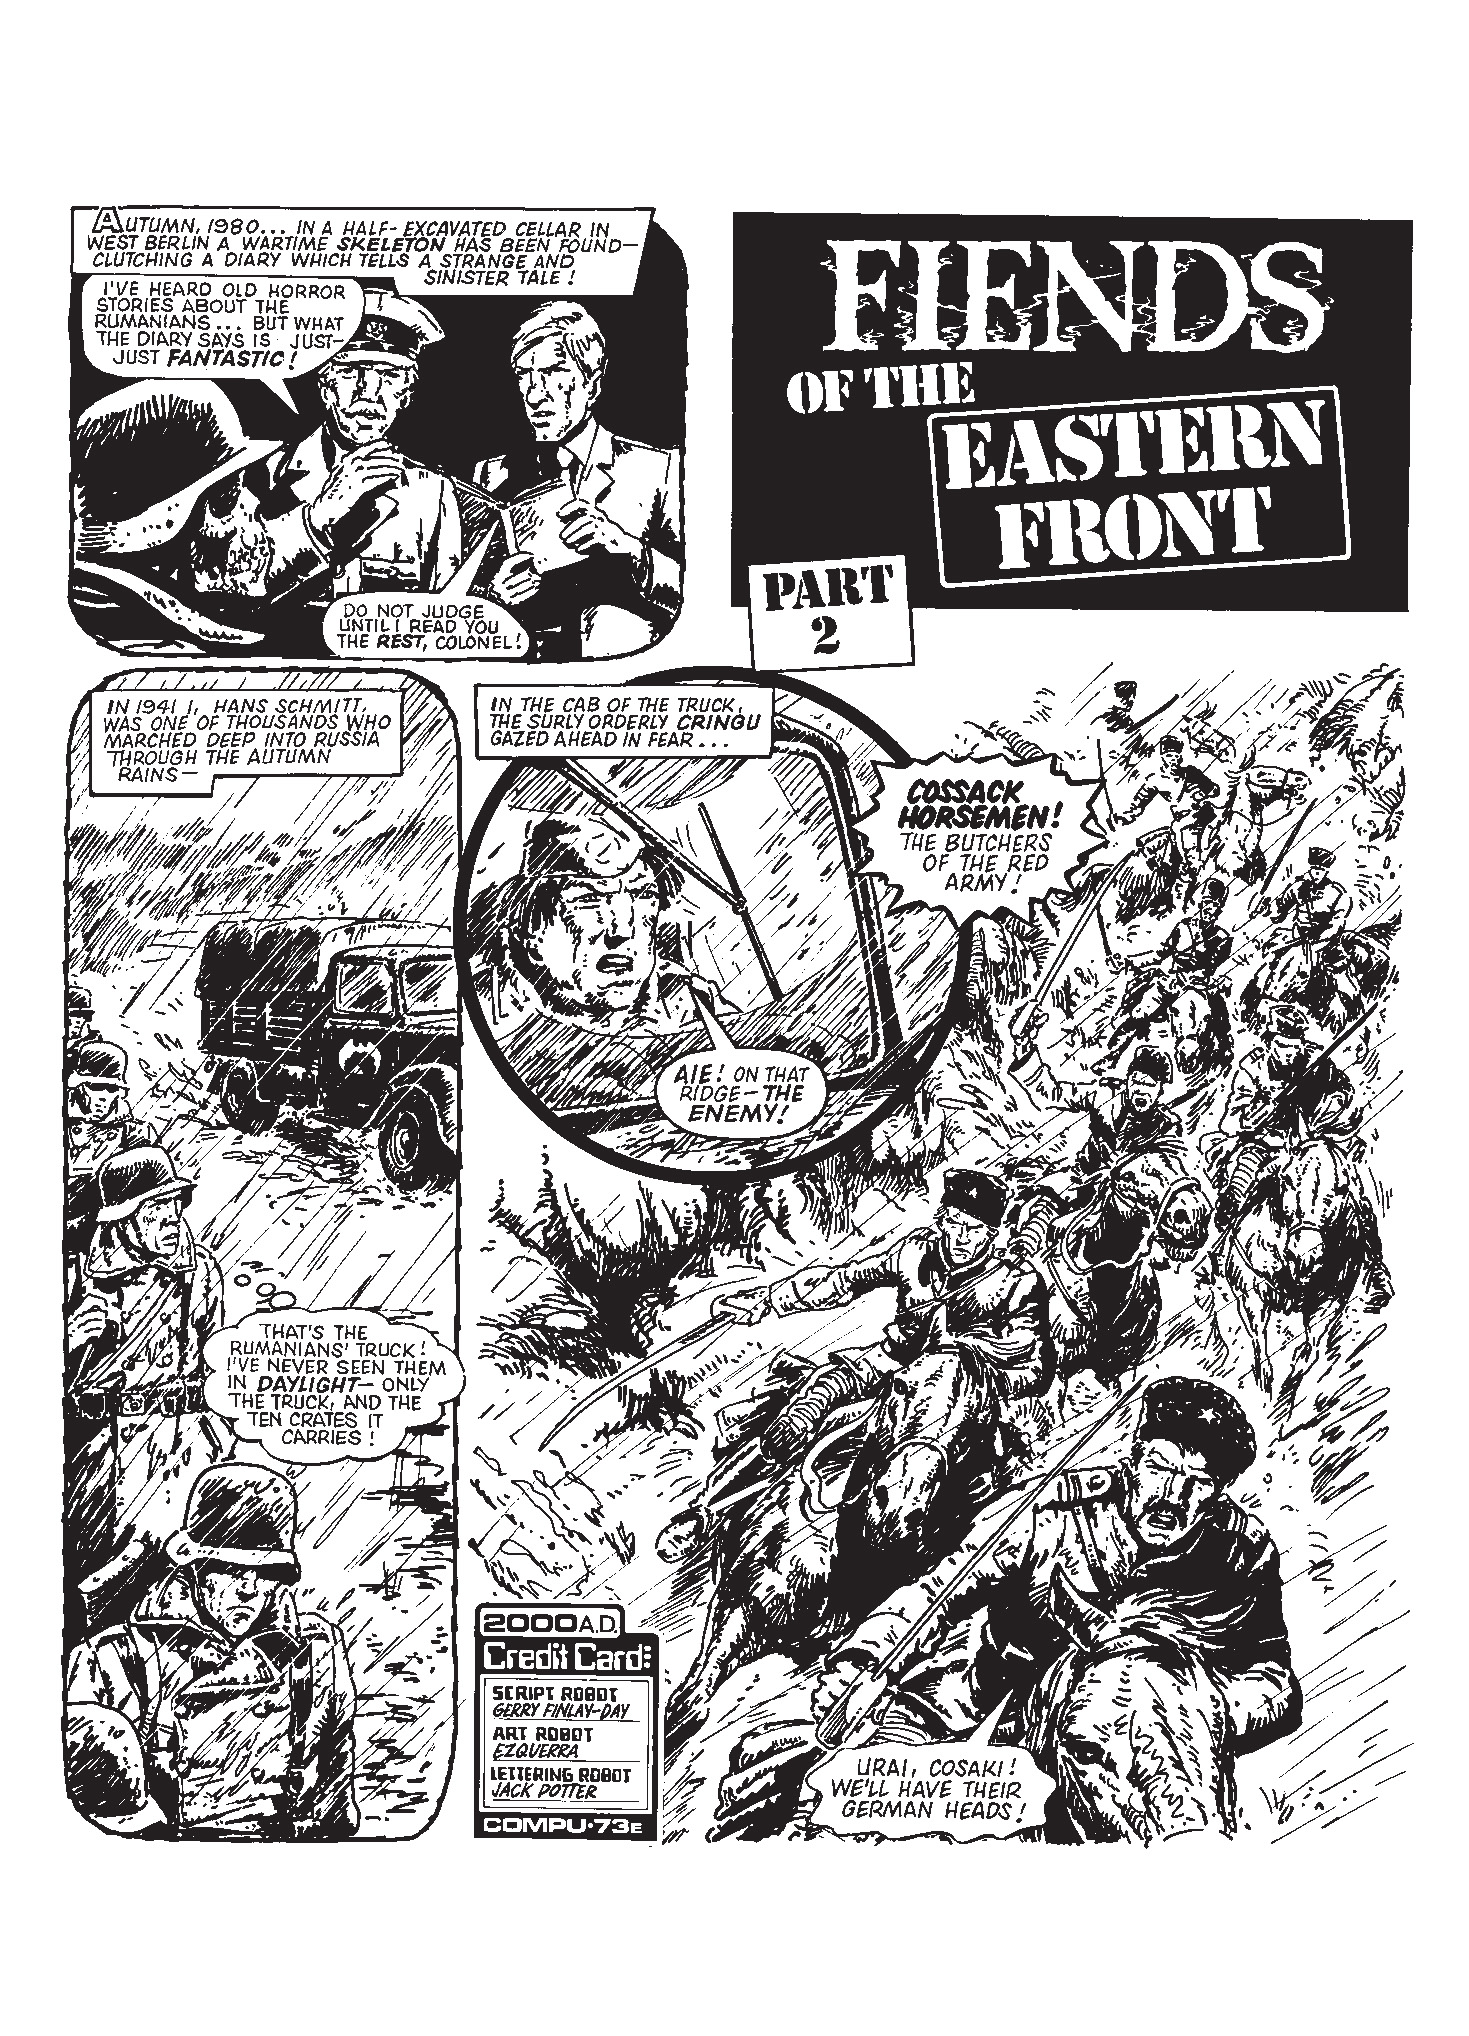 Read online Fiends of the Eastern Front comic -  Issue # TPB - 12